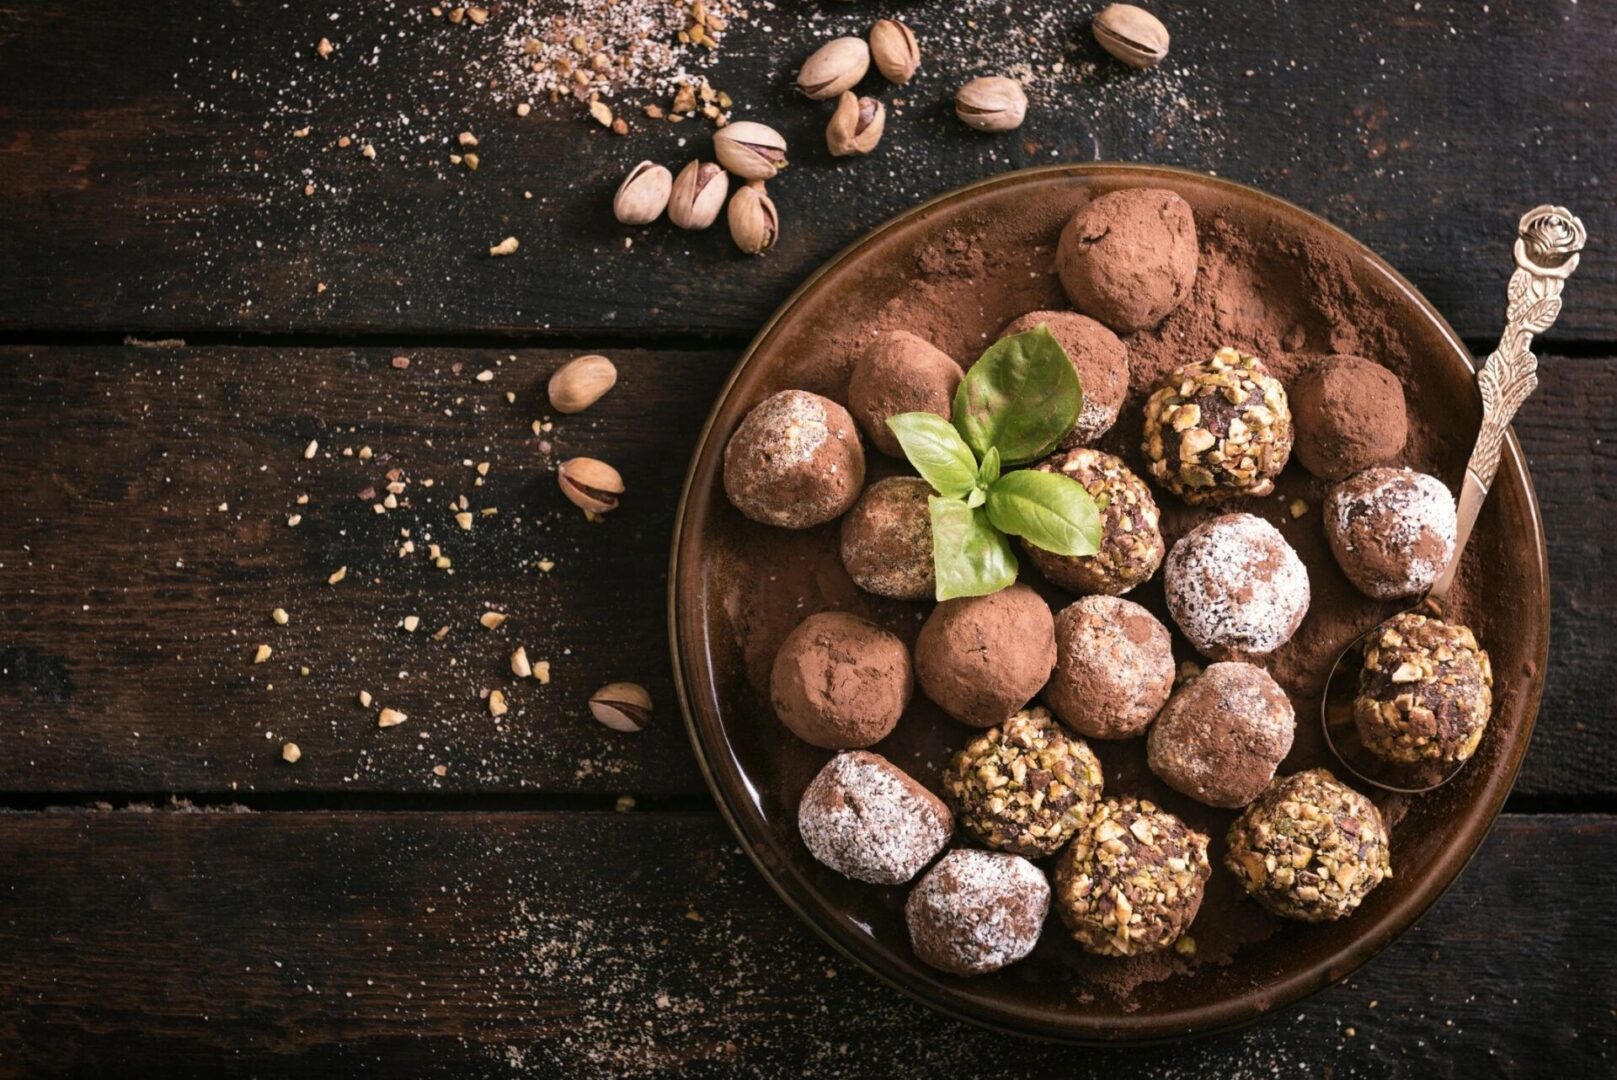 A bowl of nuts and chocolate truffles on a table.